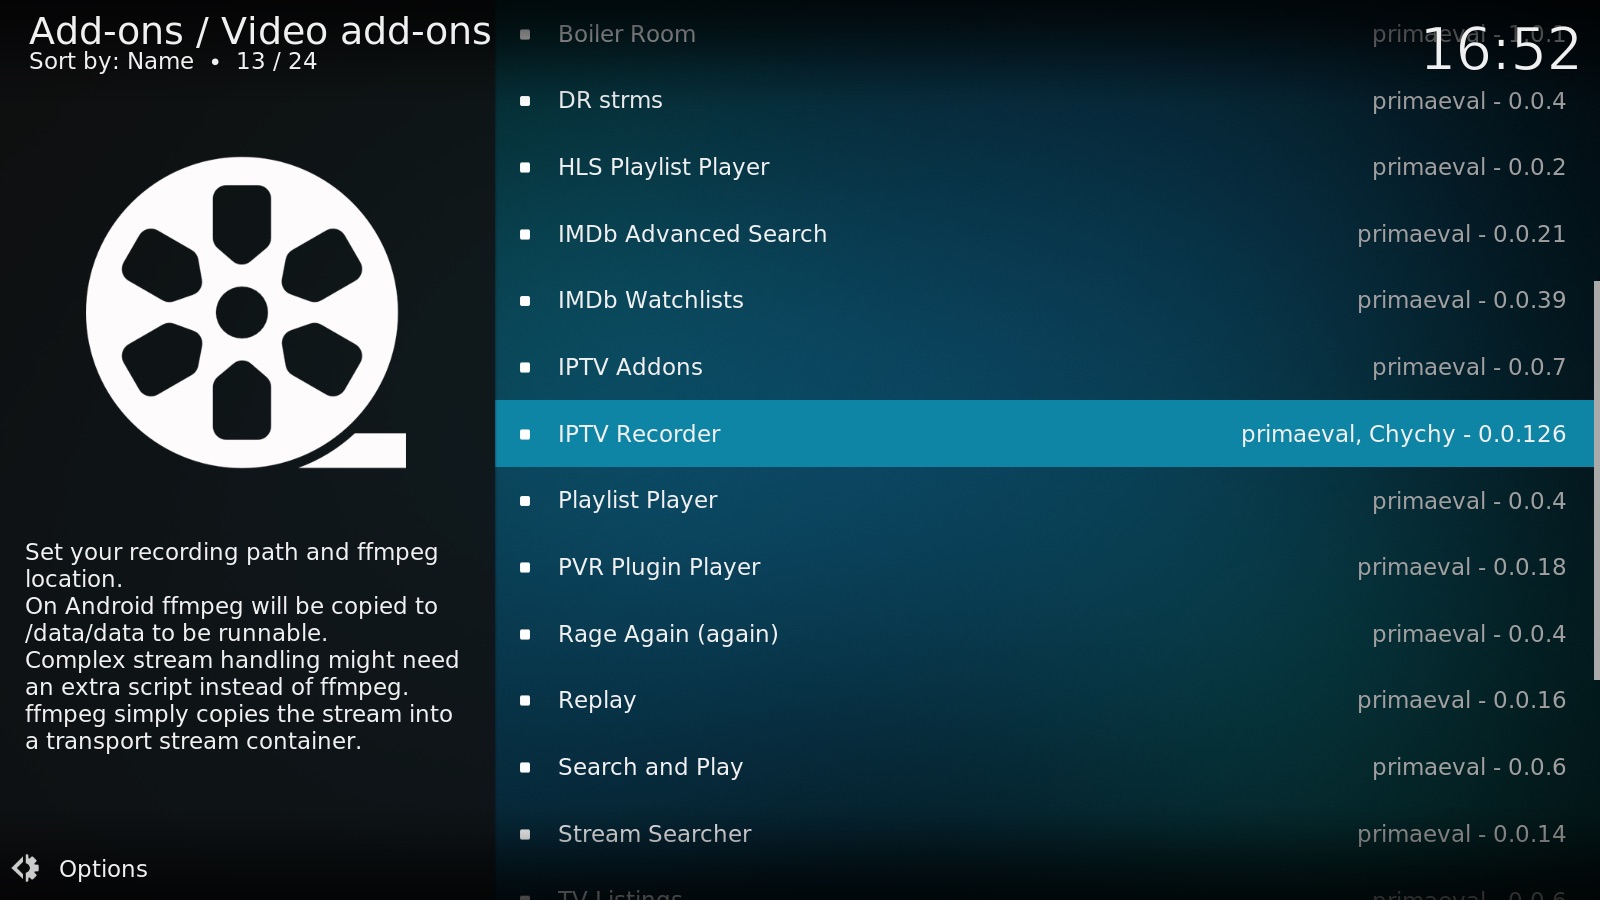 how to get pvr service on kodi 16.1